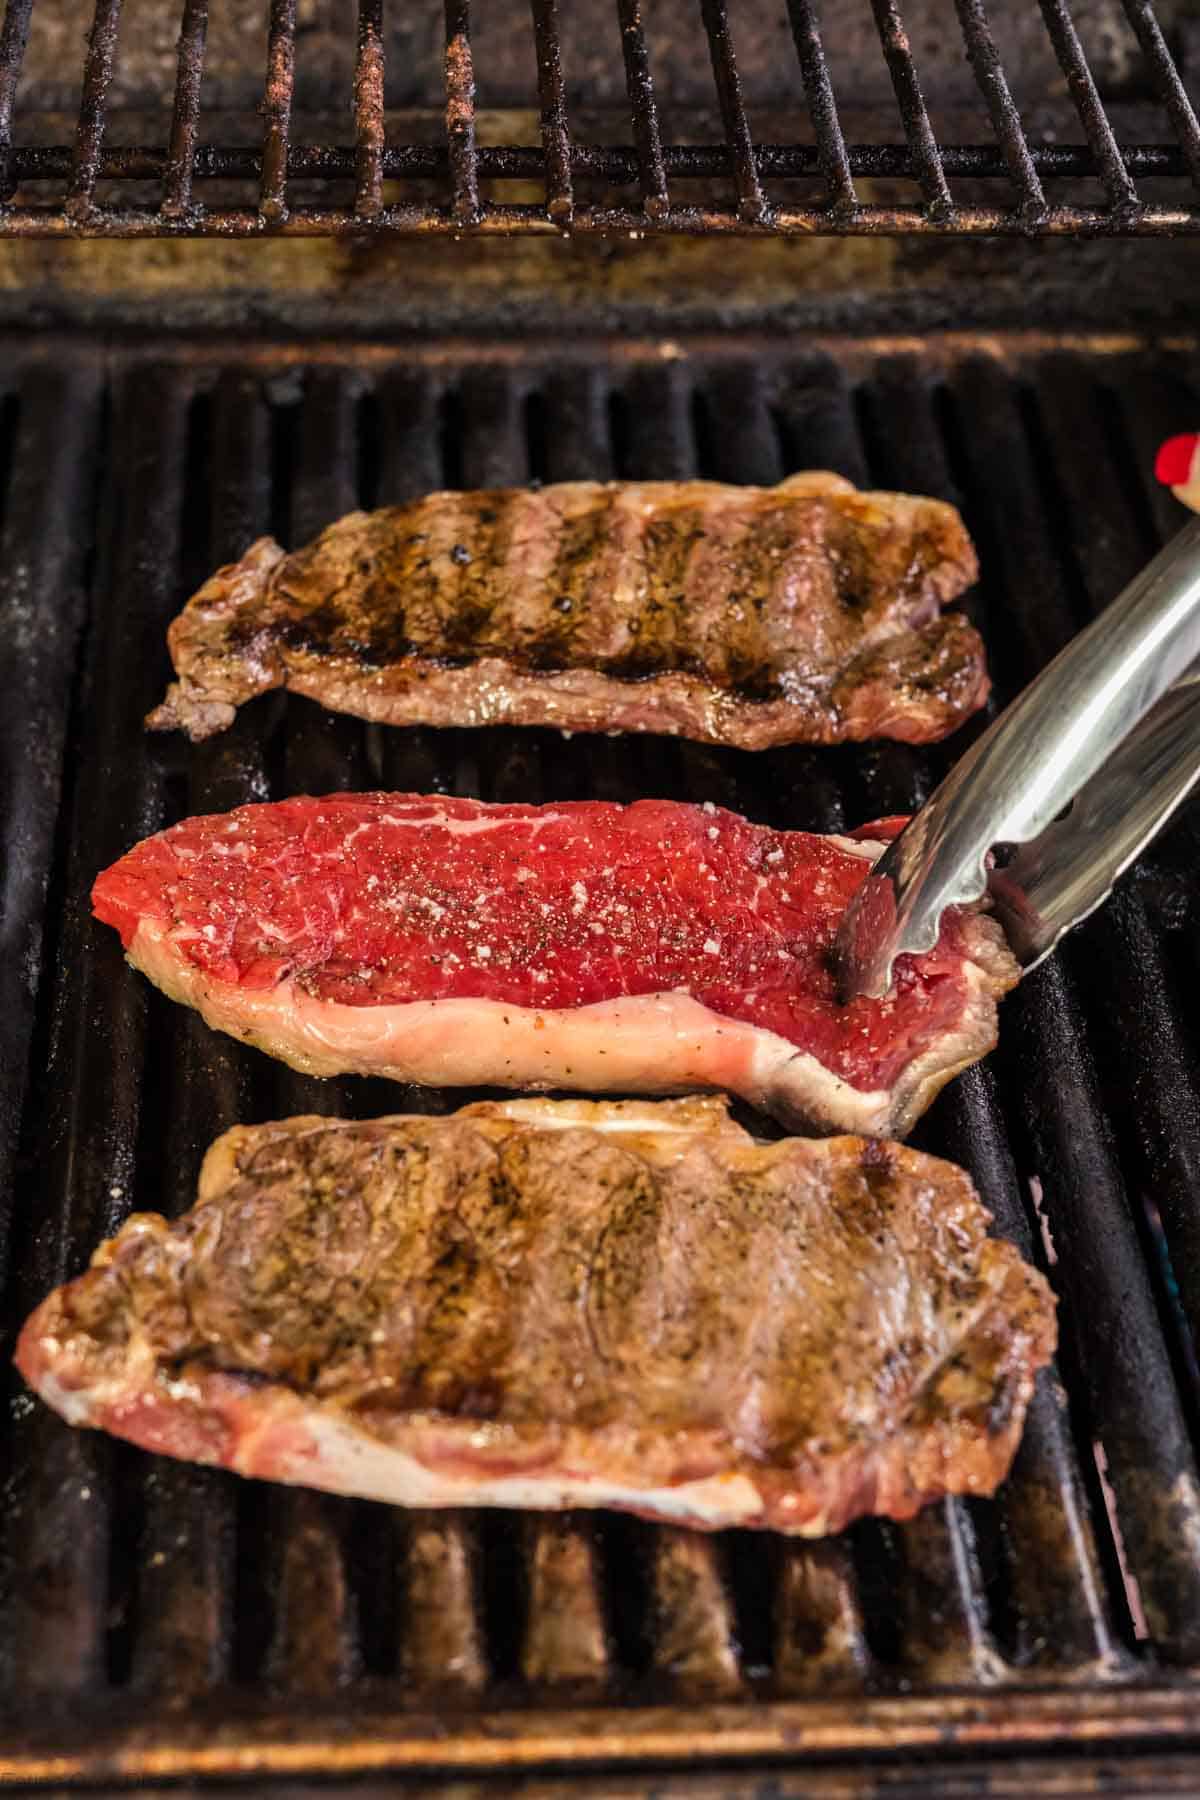 Steak on the grill being flipped after cooking one side